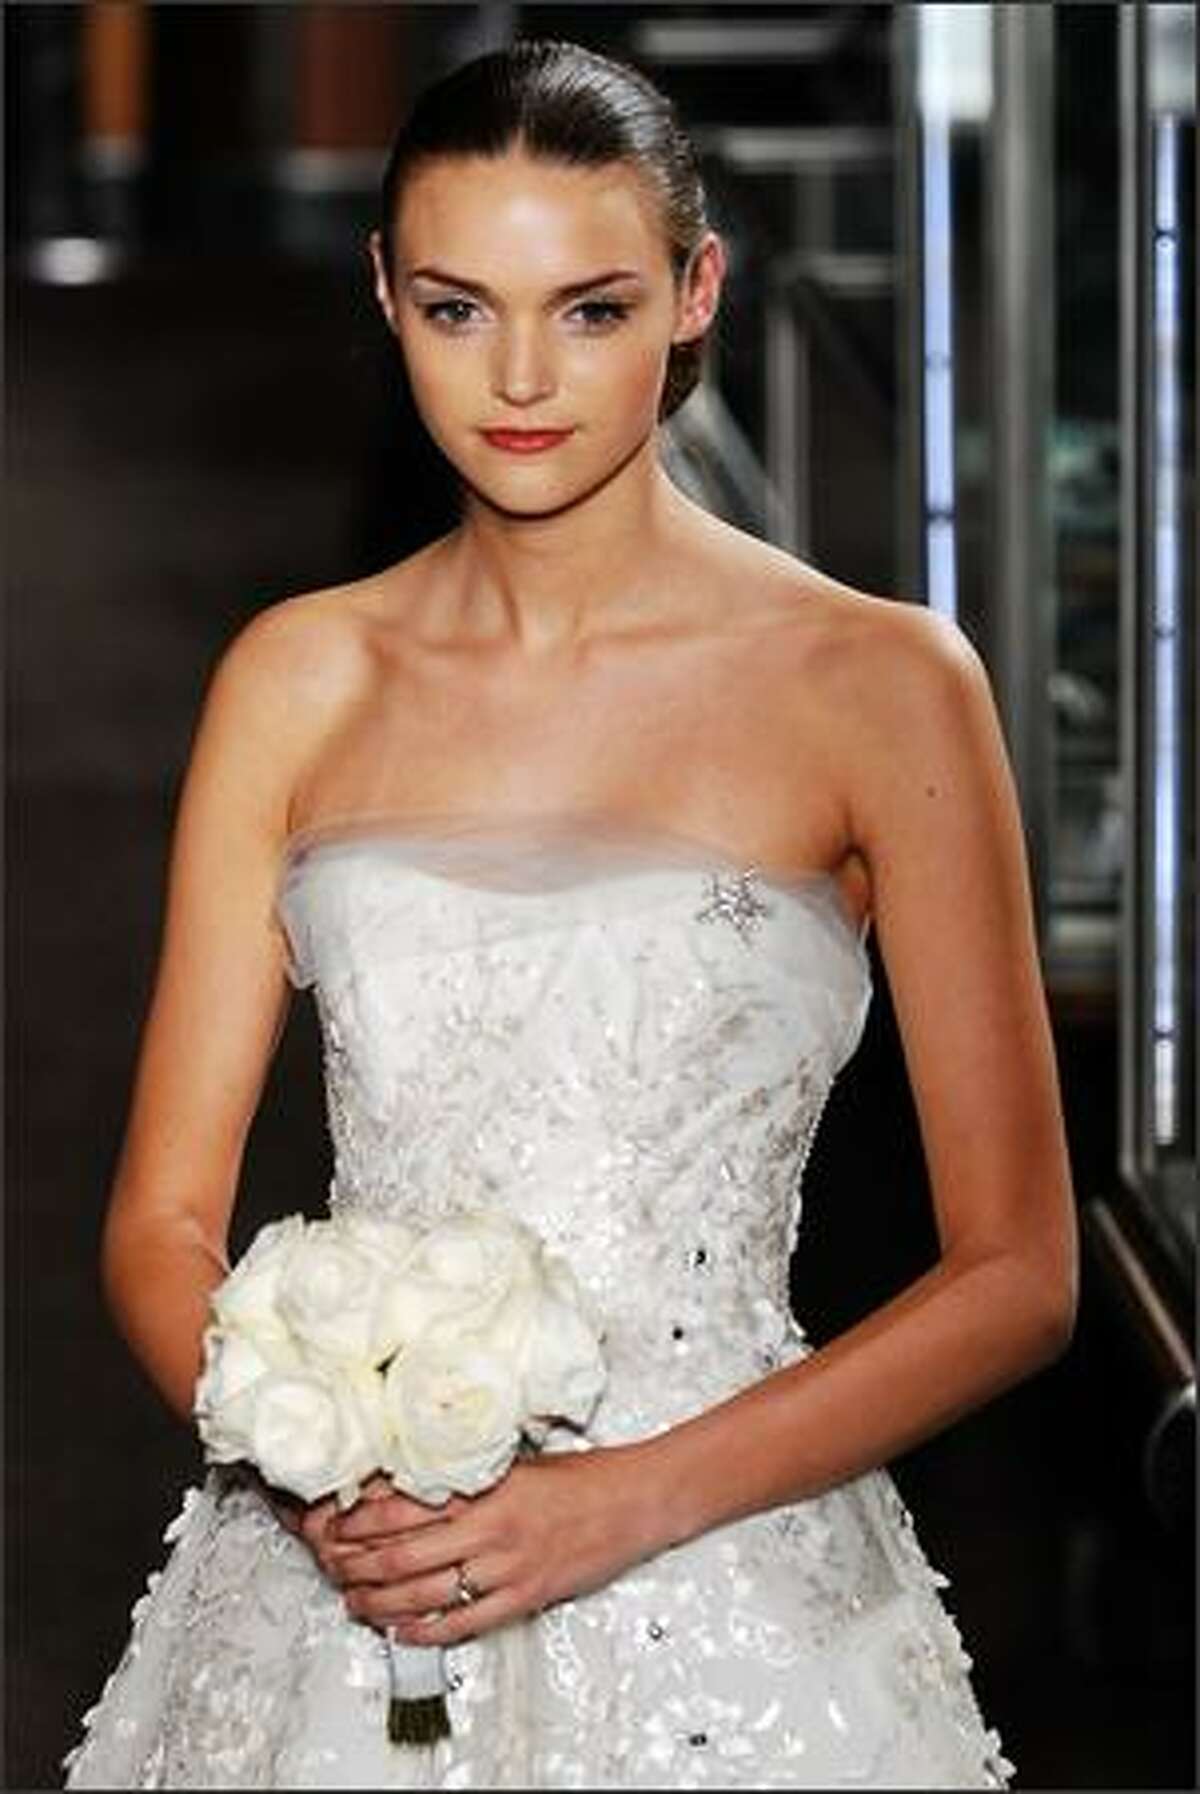 A model walks the runway at the Carolina Herrera Spring 2010 Bridal Collection at Tiffany & Co., Fifth Avenue Flagship Store in New York City.